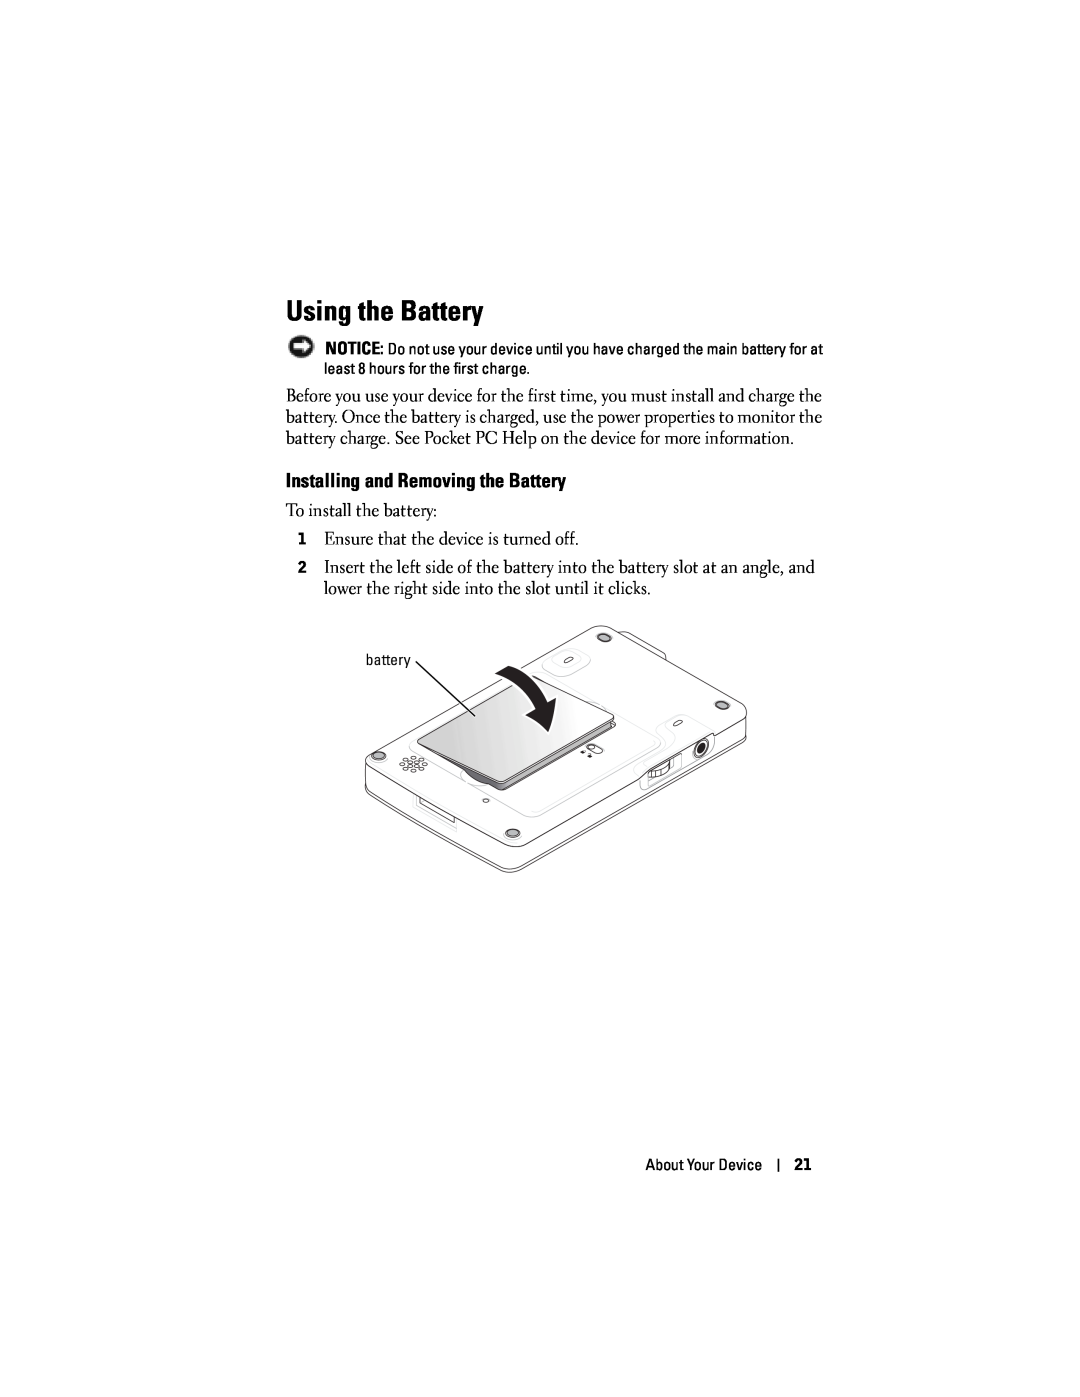 Dell HC02U-W, HC02U-C, HD03U, HC02U-B owner manual Using the Battery, Installing and Removing the Battery 